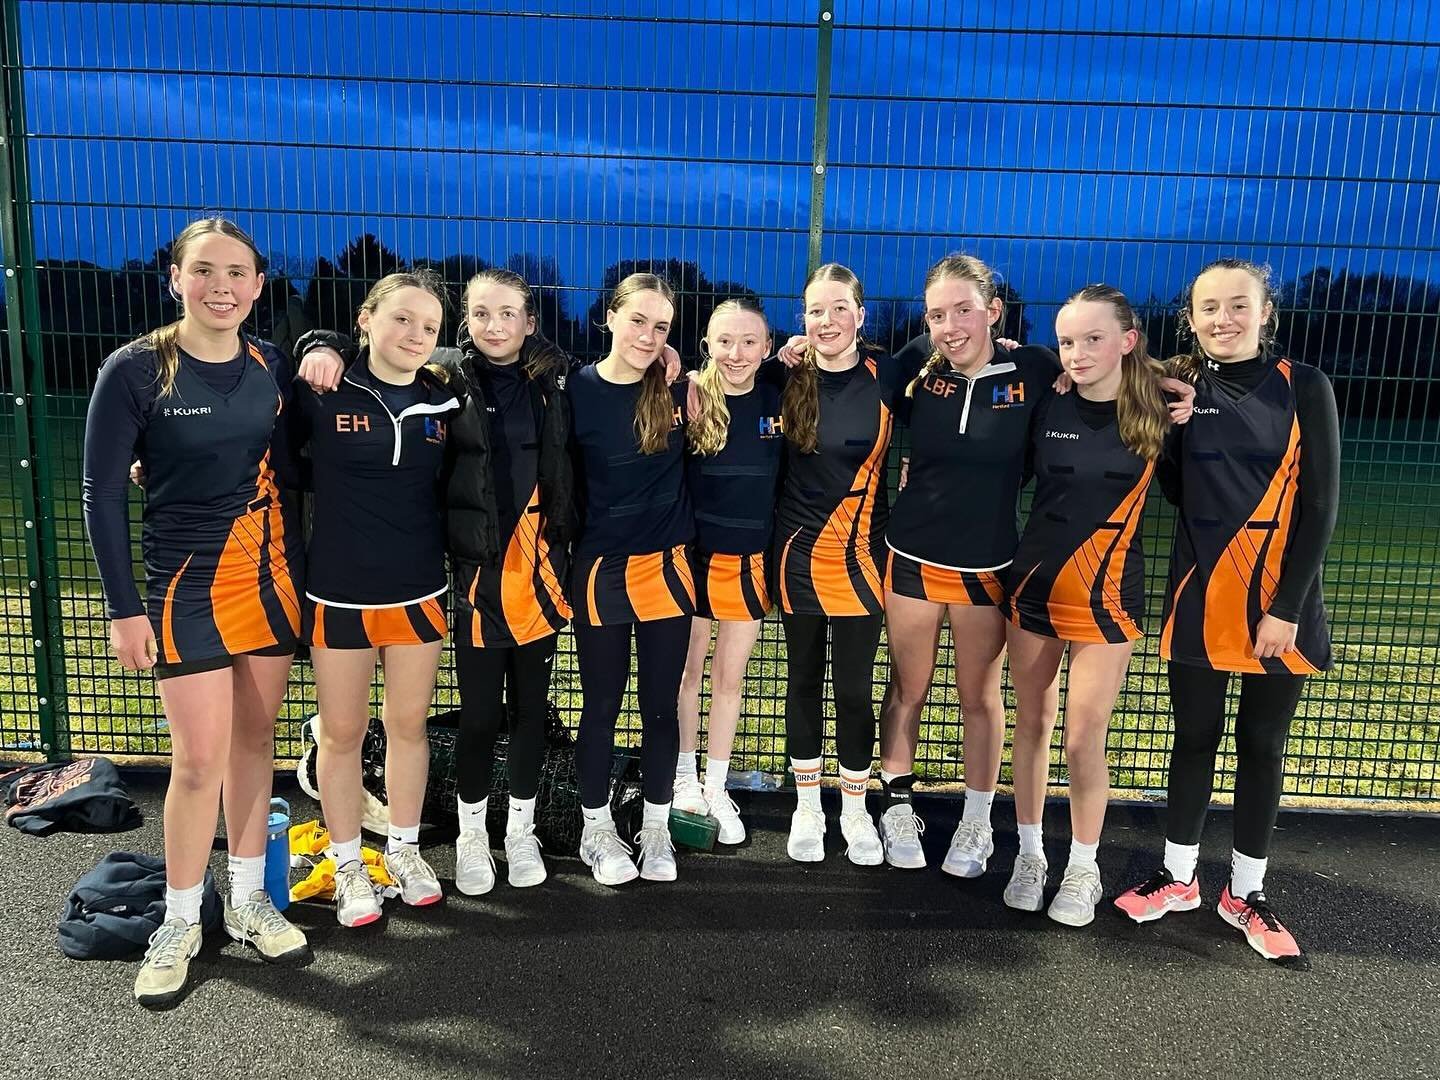 U13s! Oranges; against a strong U14s Wodson A team, the girls made a good, but again, a little slow start, ending the quarter 8:8. The girls got their heads in the game in the second quarter and pulled away. The girls got their passing down the court